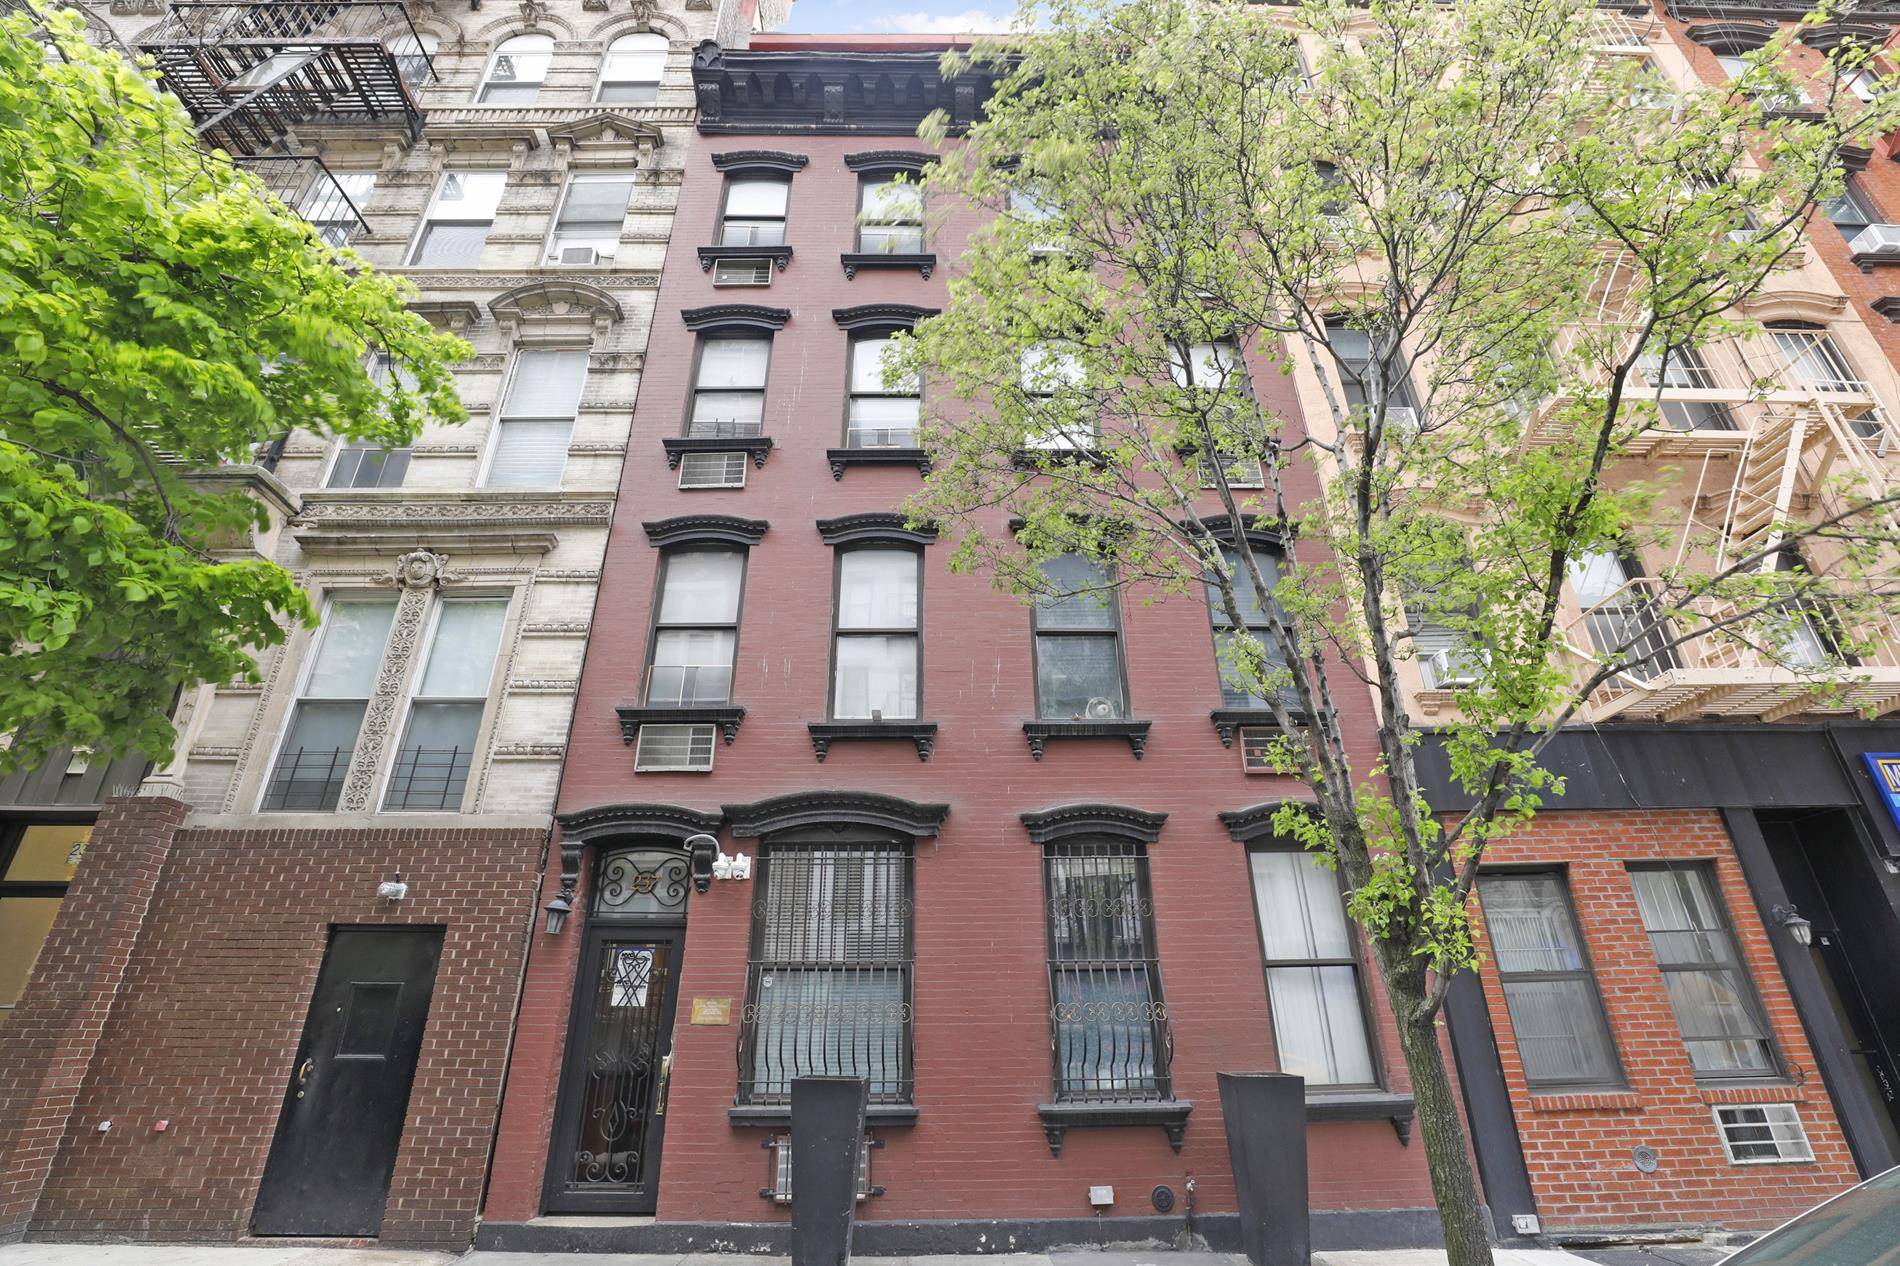 Finally you can have it all, Charming Brownstone details with new finishes, condo flexibility, spacious 1 bedroom apt on a quiet tree lined street in amazing neighborhood and all at ...